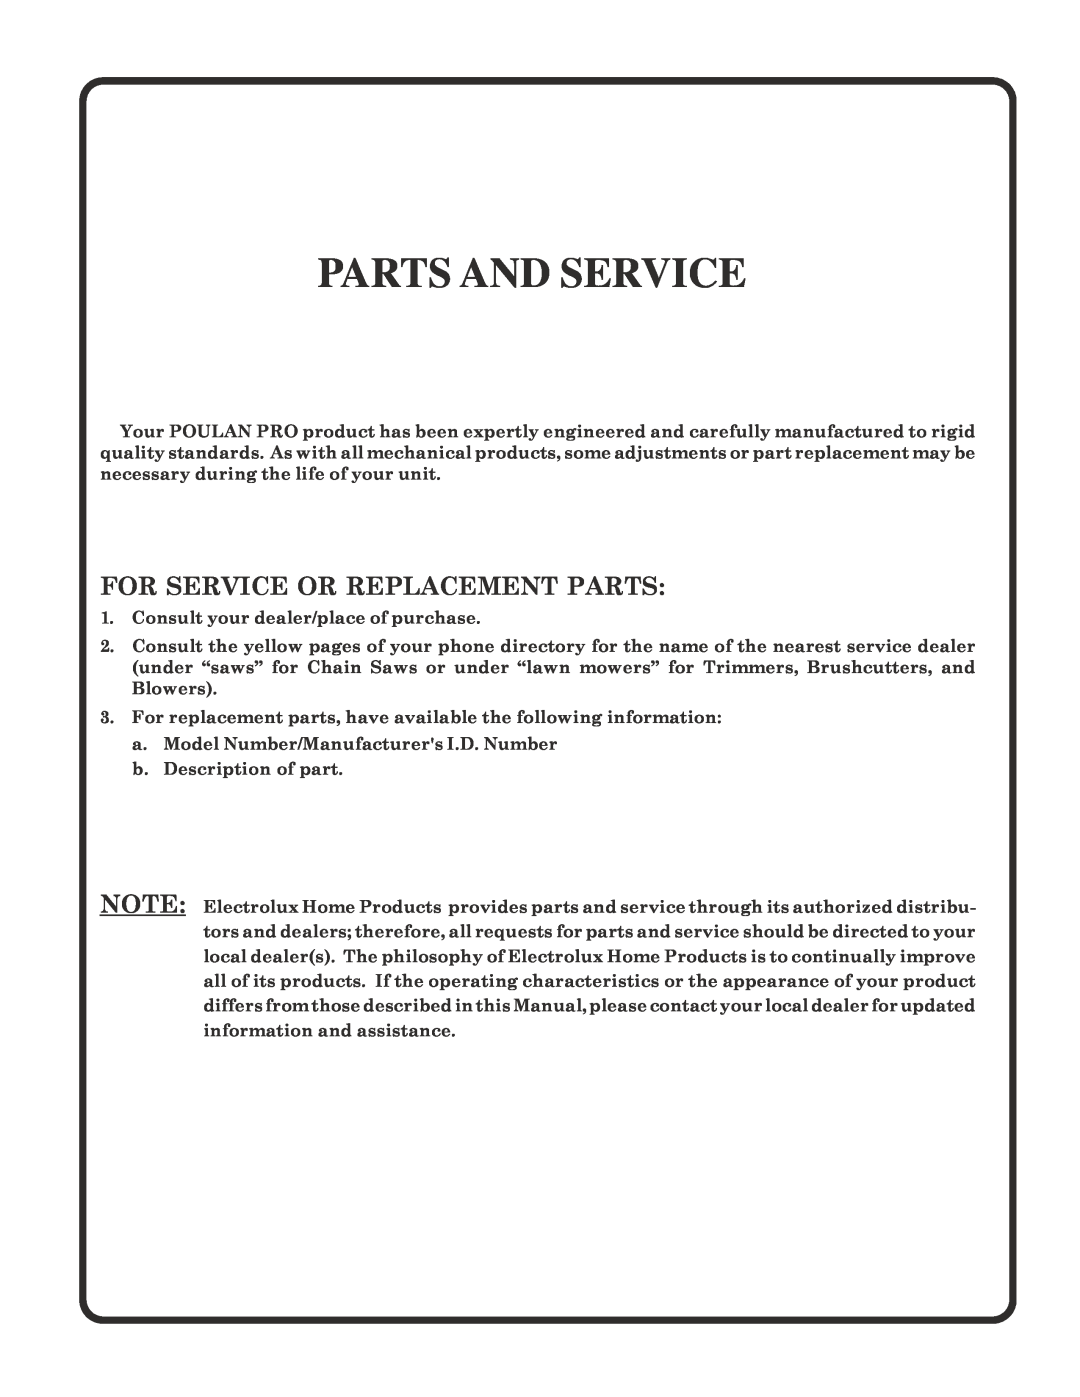 Poulan 181347 owner manual Parts And Service, For Service Or Replacement Parts 